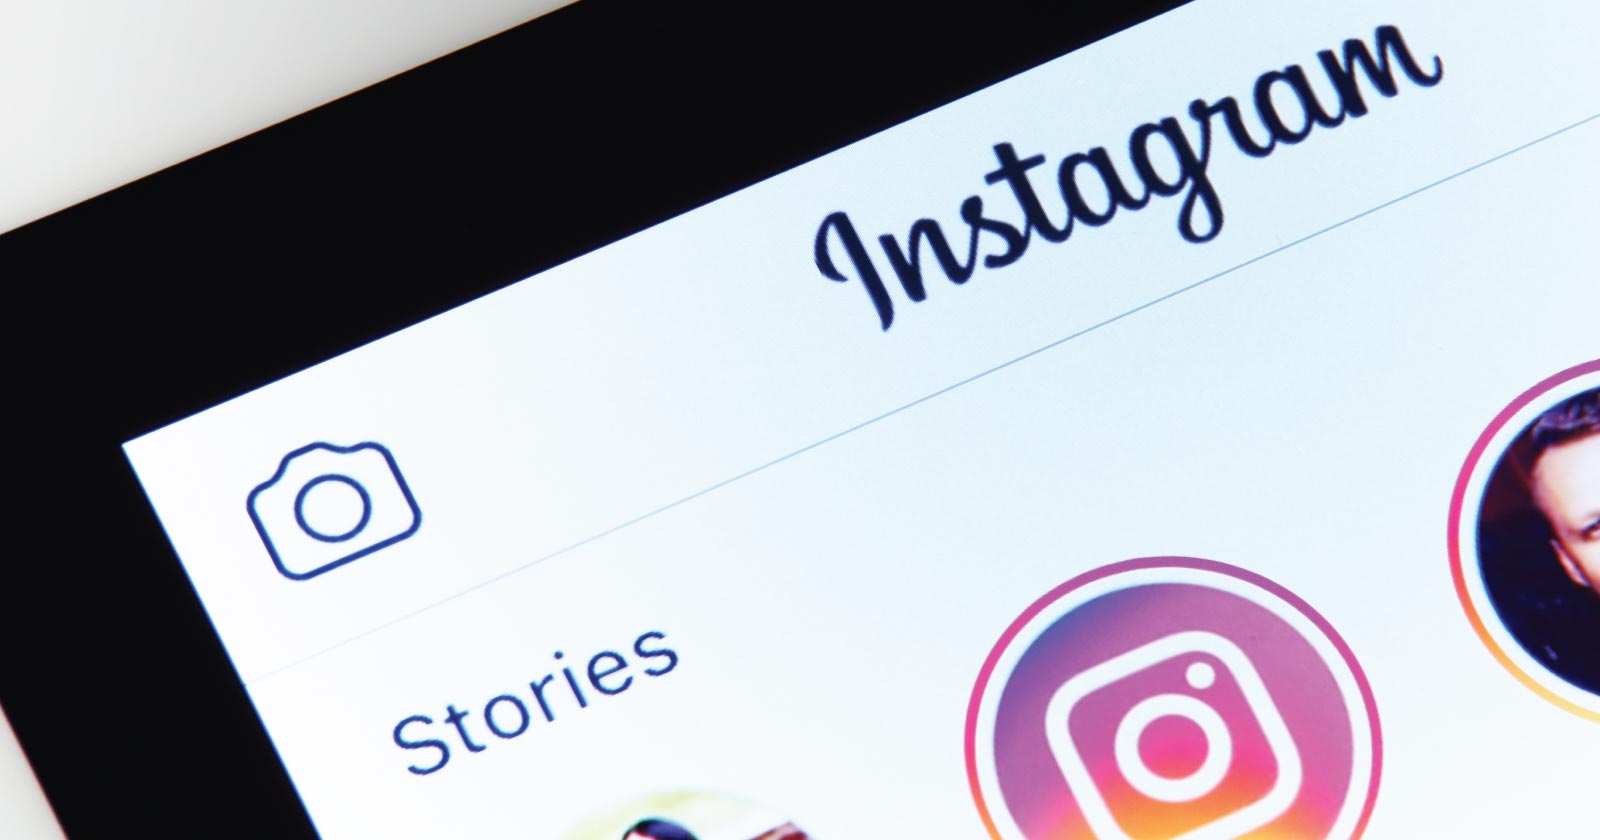 How Can You Benefit from Having More Instagram Followers?